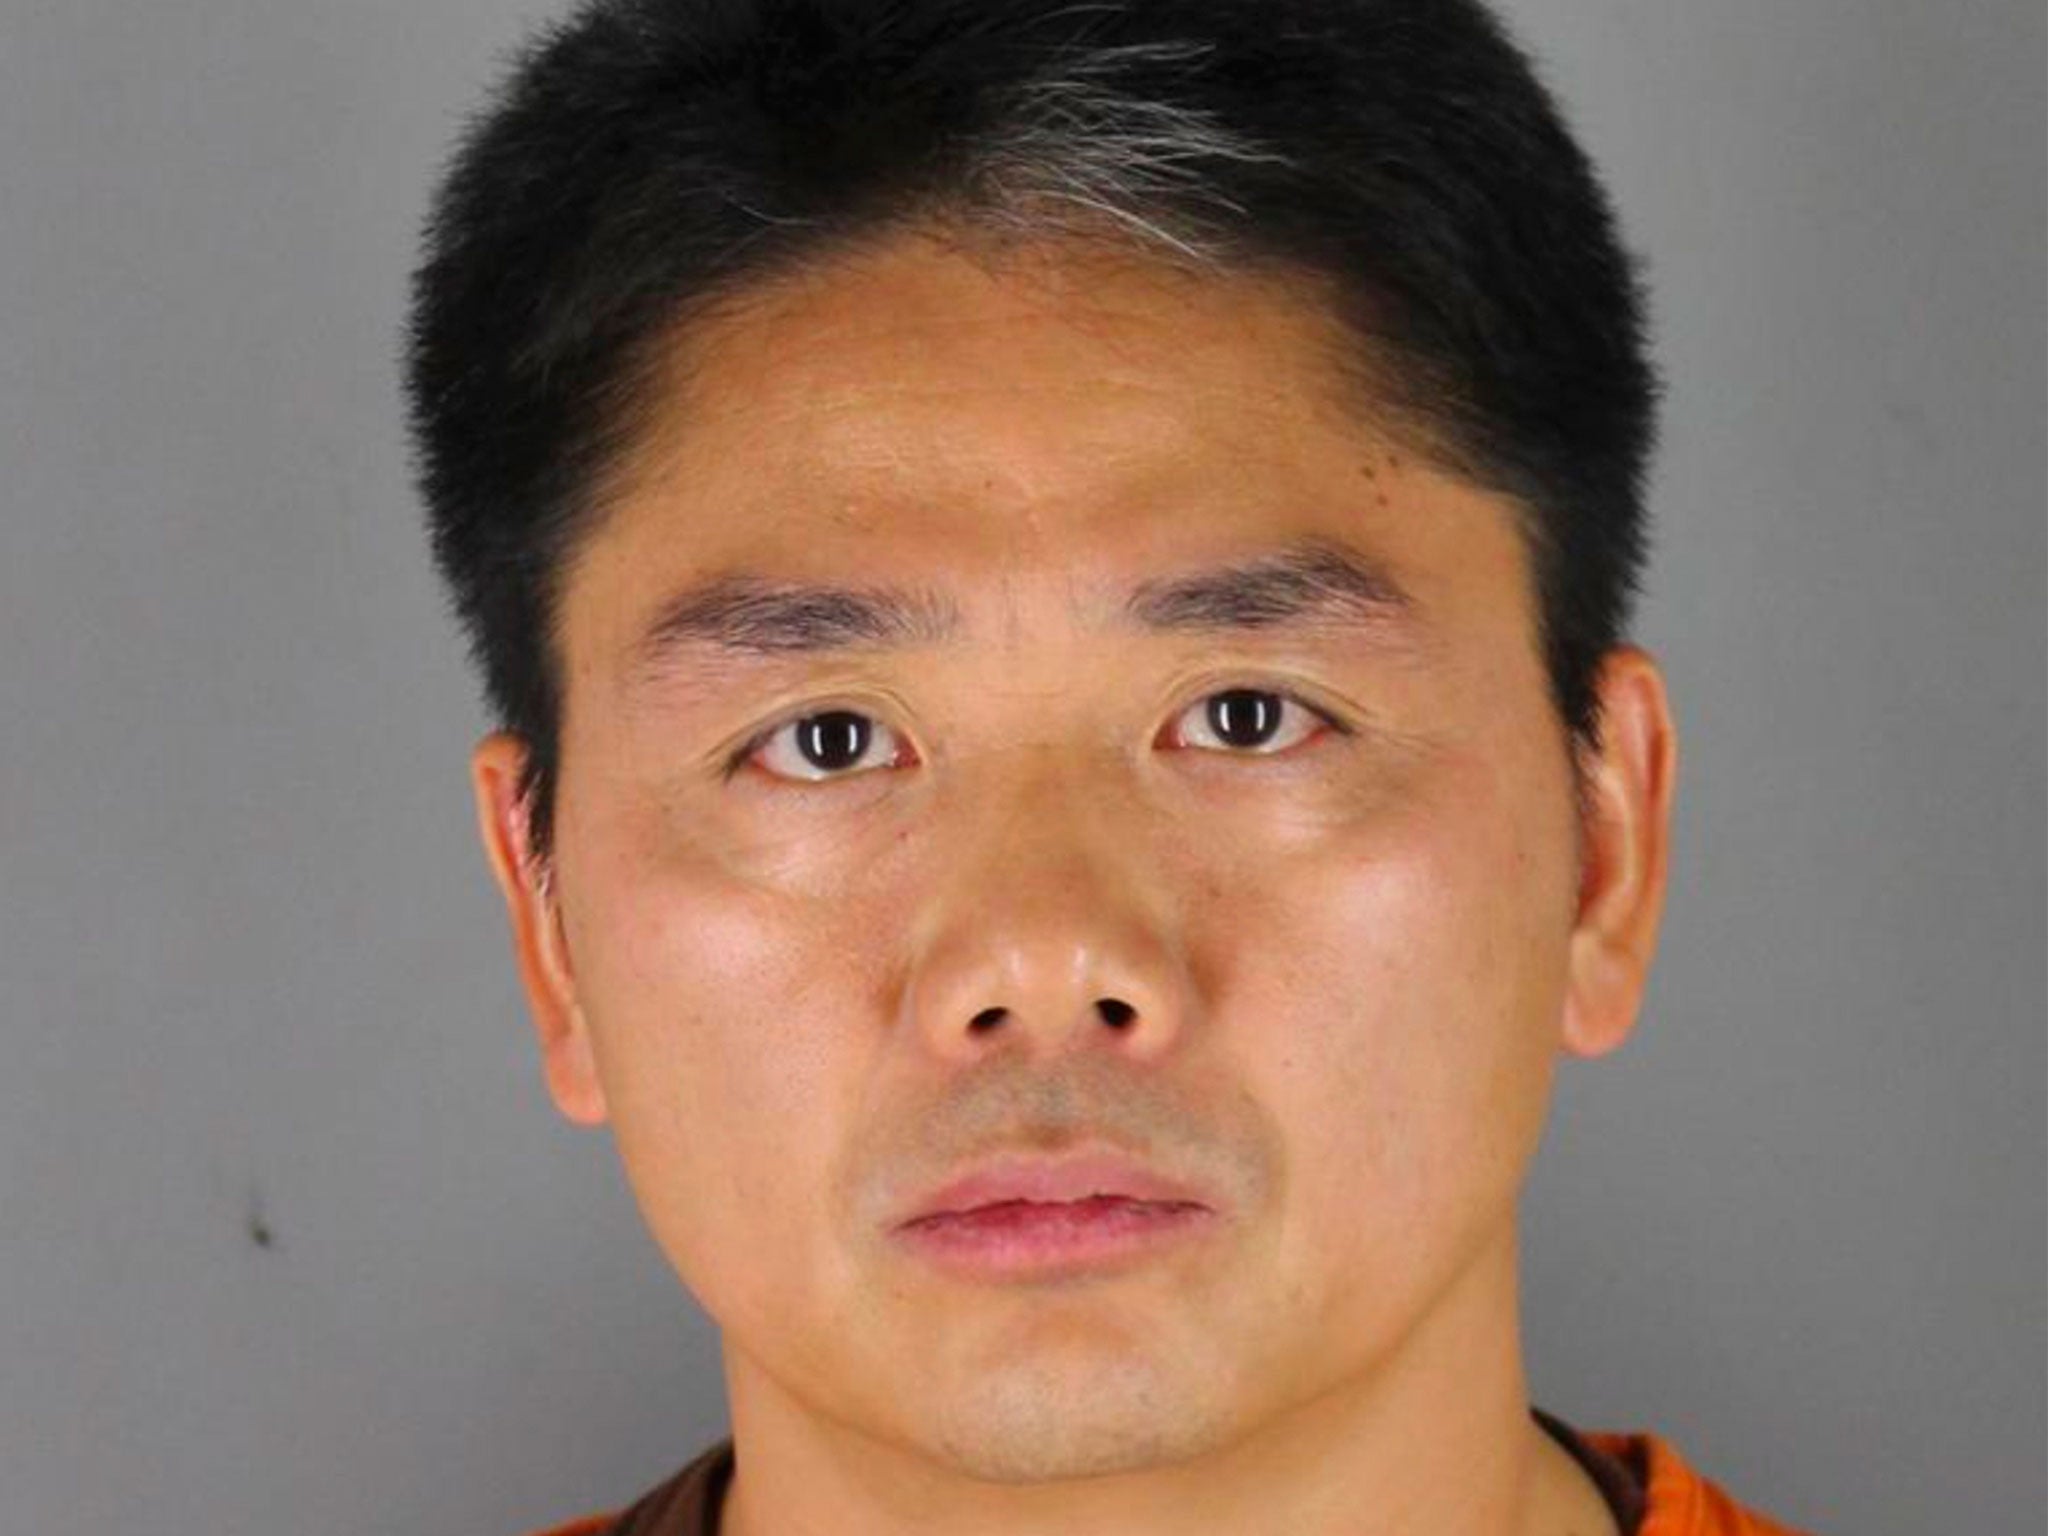 Liu Qiangdong was arrested in Minnesota following an allegation of sexual misconduct